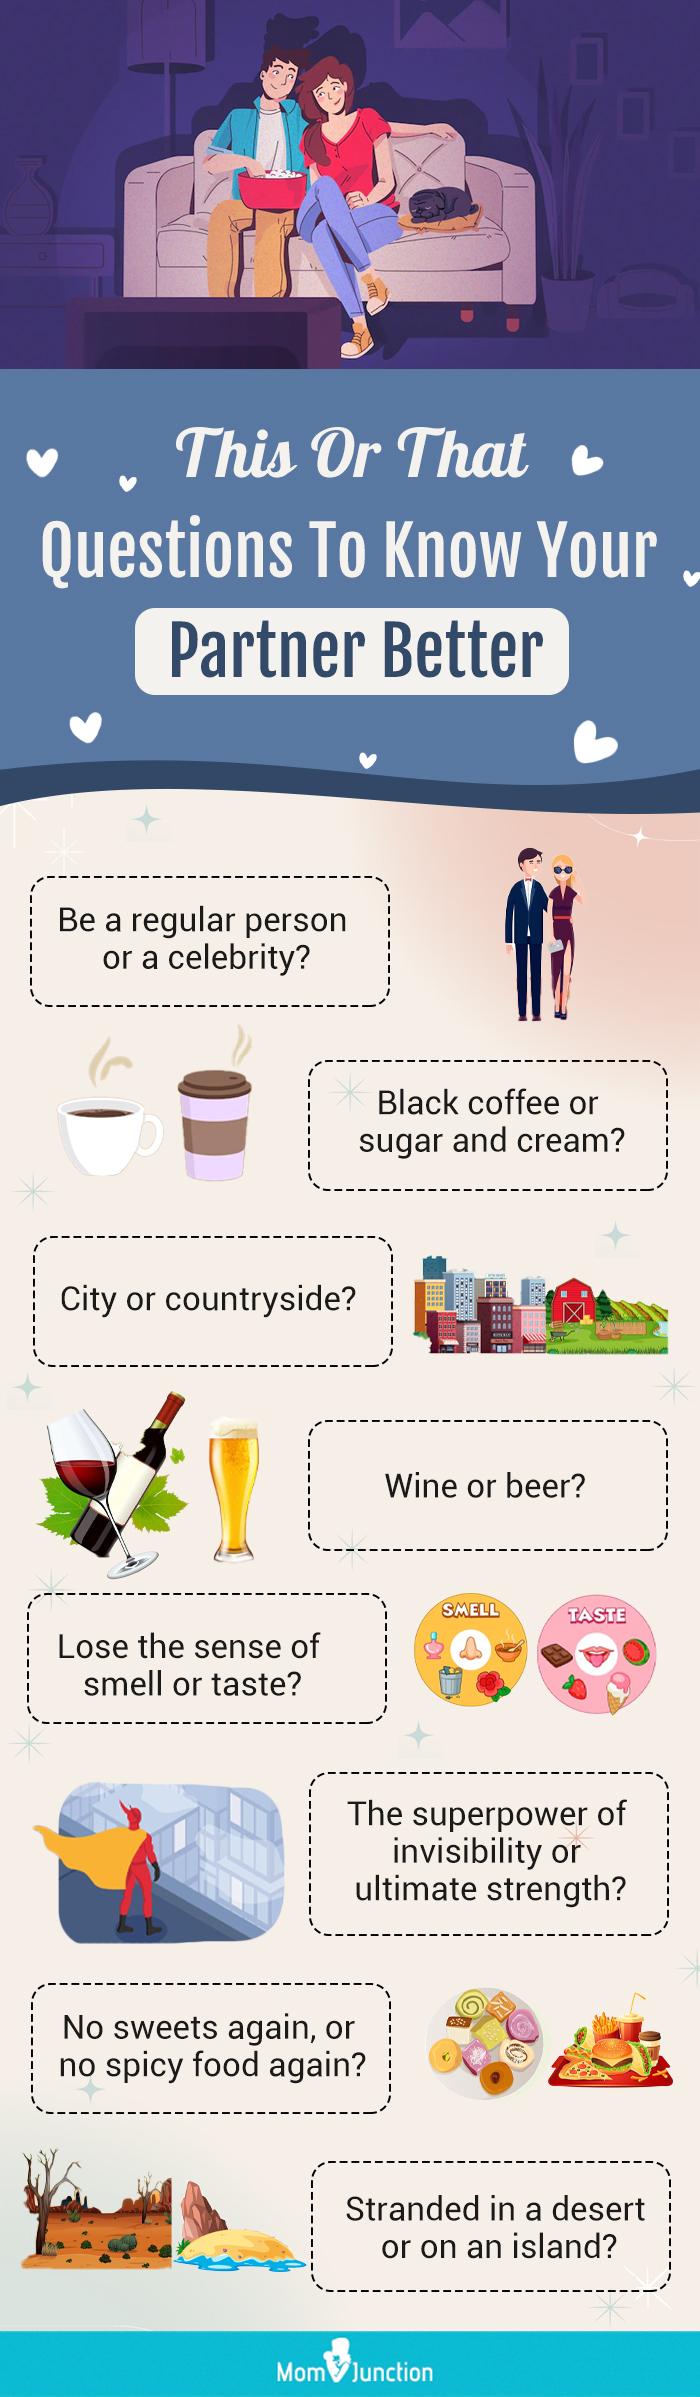 this or that questions to know your partner better (infographic)